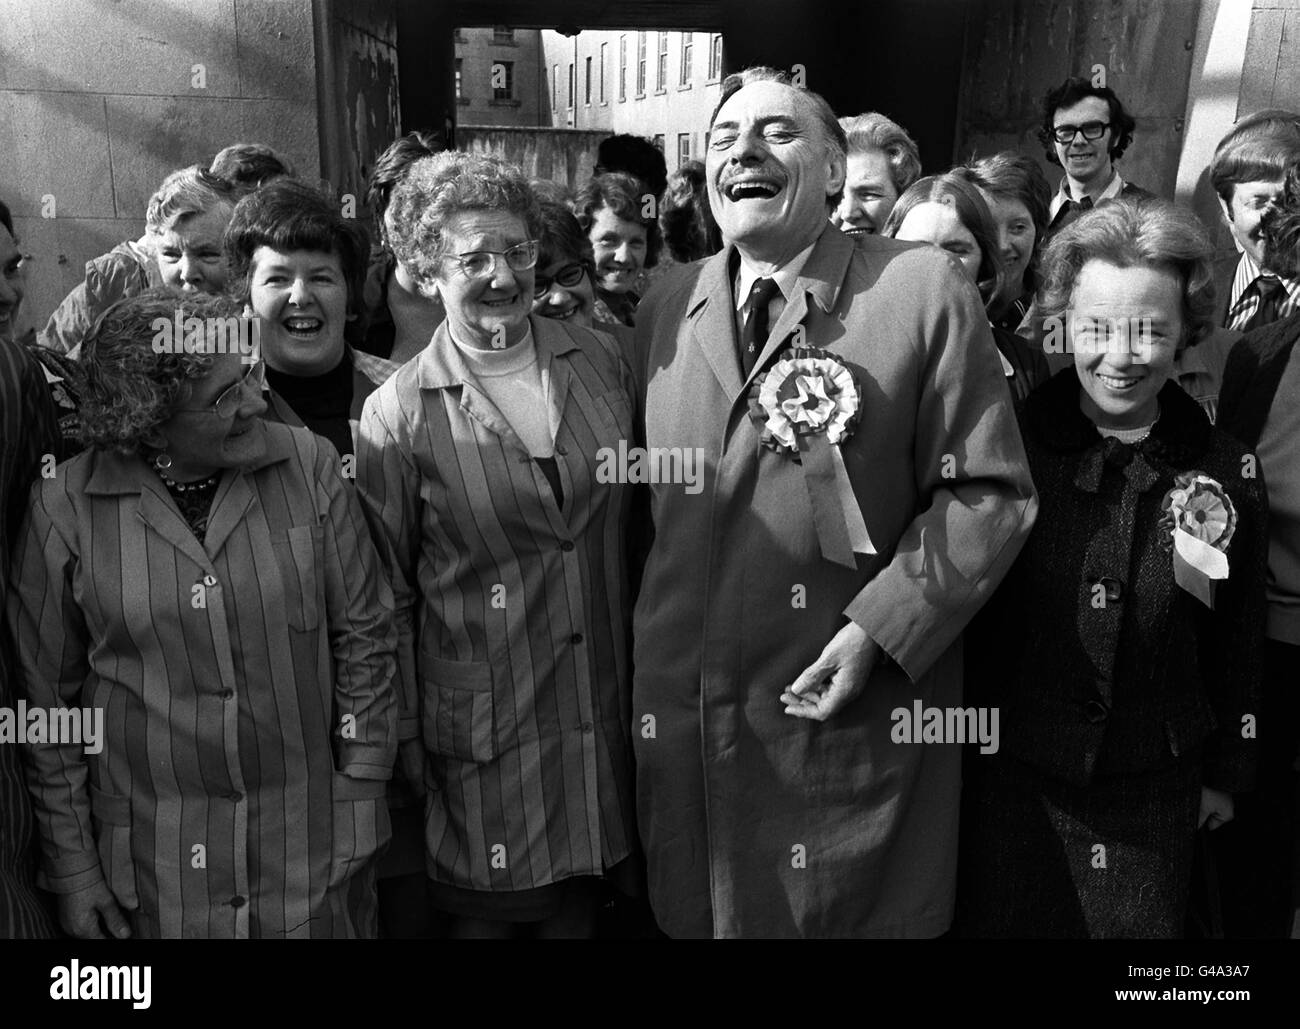 Former Tory Cabinet Minister Enoch Powell with his wife Pamela (wearing rosette) during his election campaign as United Ulster Unionist candidate for South Down. Mr Powell, famous for his 'Rivers of Blood' immigration speech, died in hospital aged 85. * He had been suffering from Parkinson's disease. Stock Photo